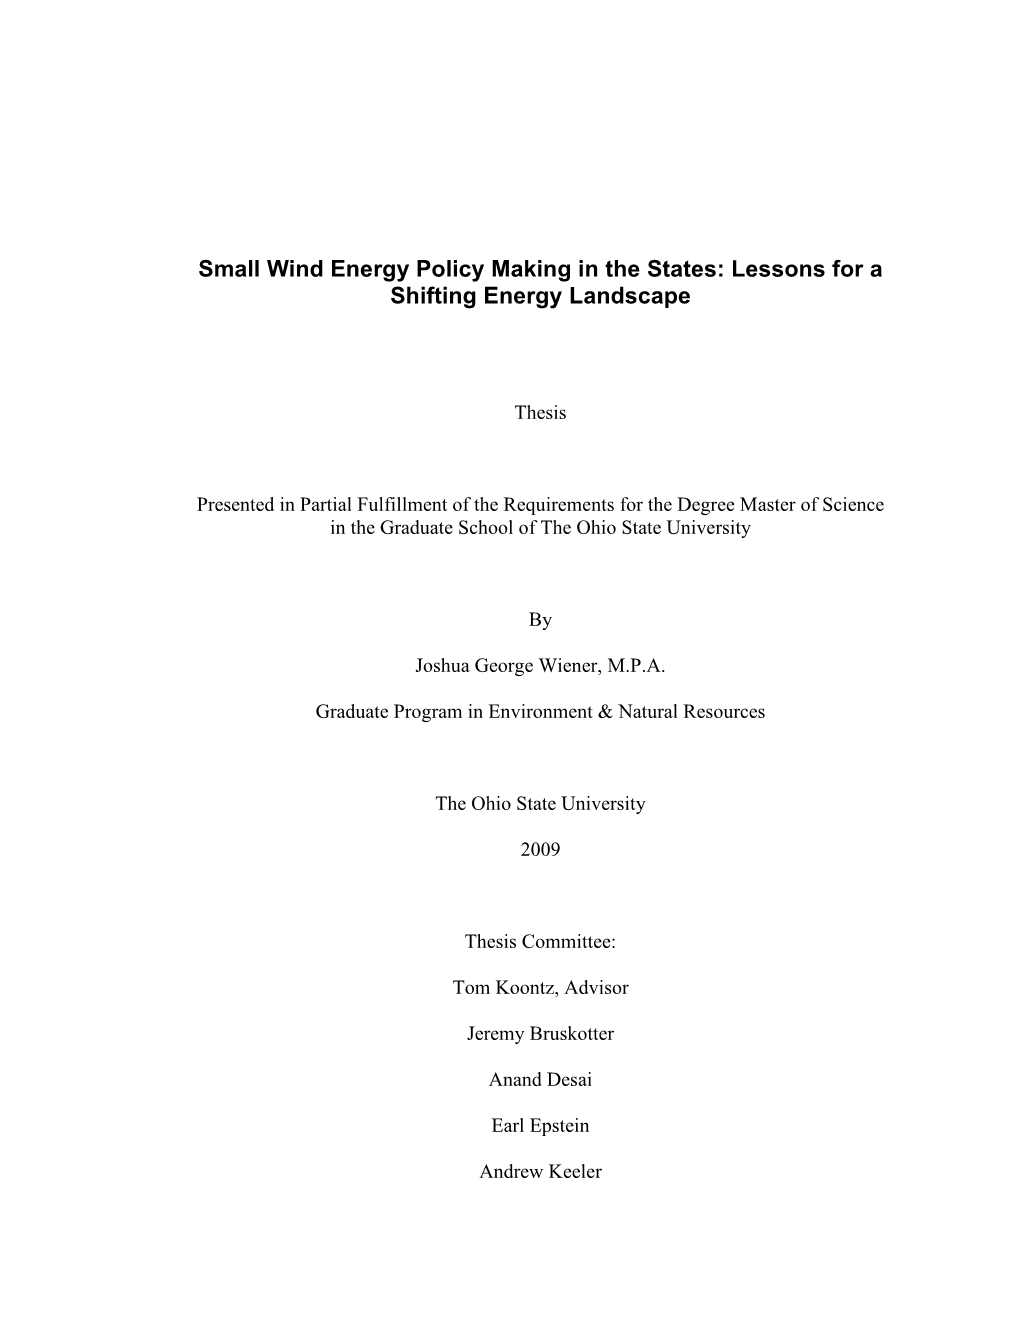 Small Wind Energy Policy Making in the States: Lessons for a Shifting Energy Landscape